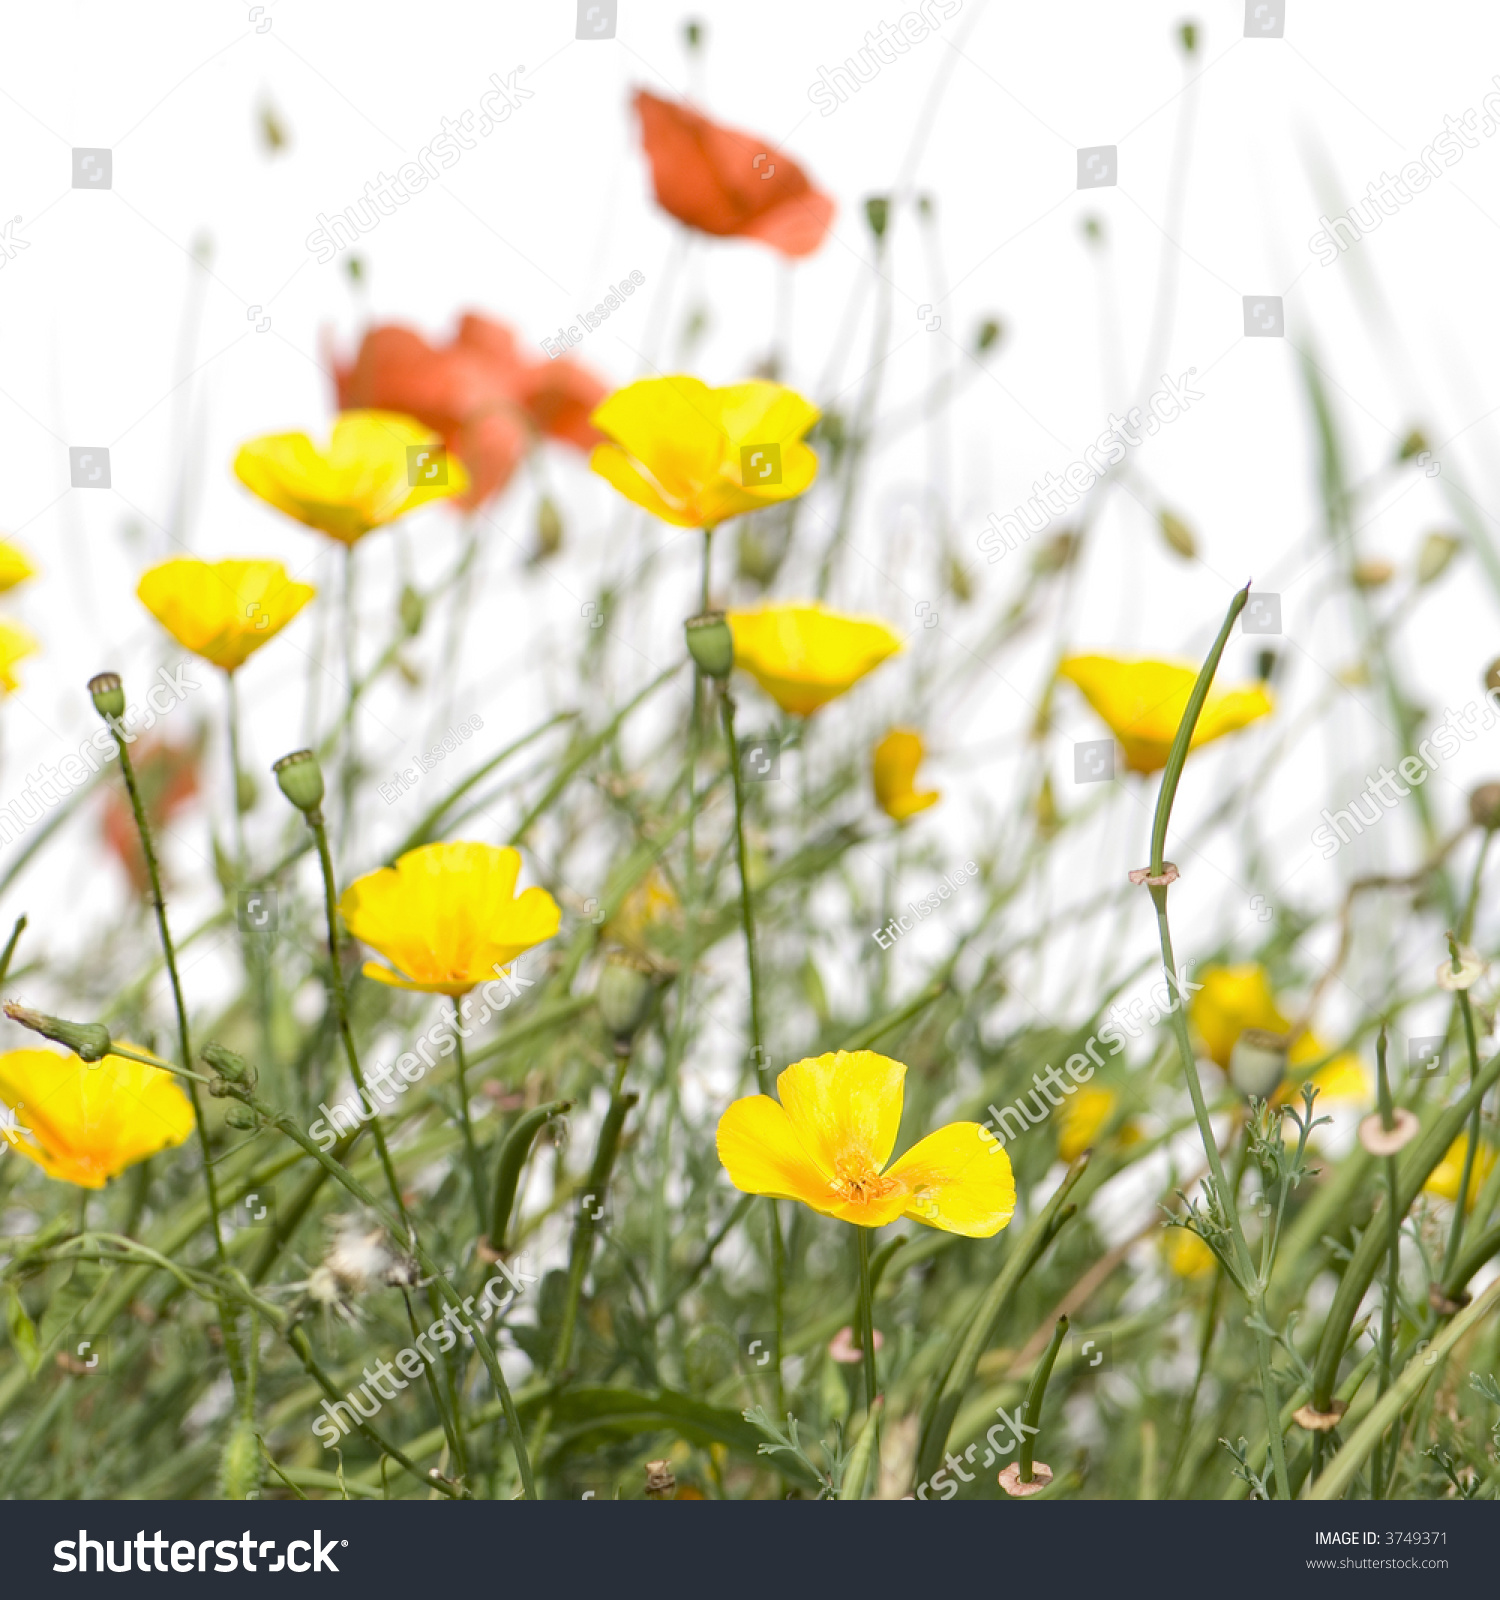 Wild Flowers Against A White Background Stock Photo 3749371 : Shutterstock